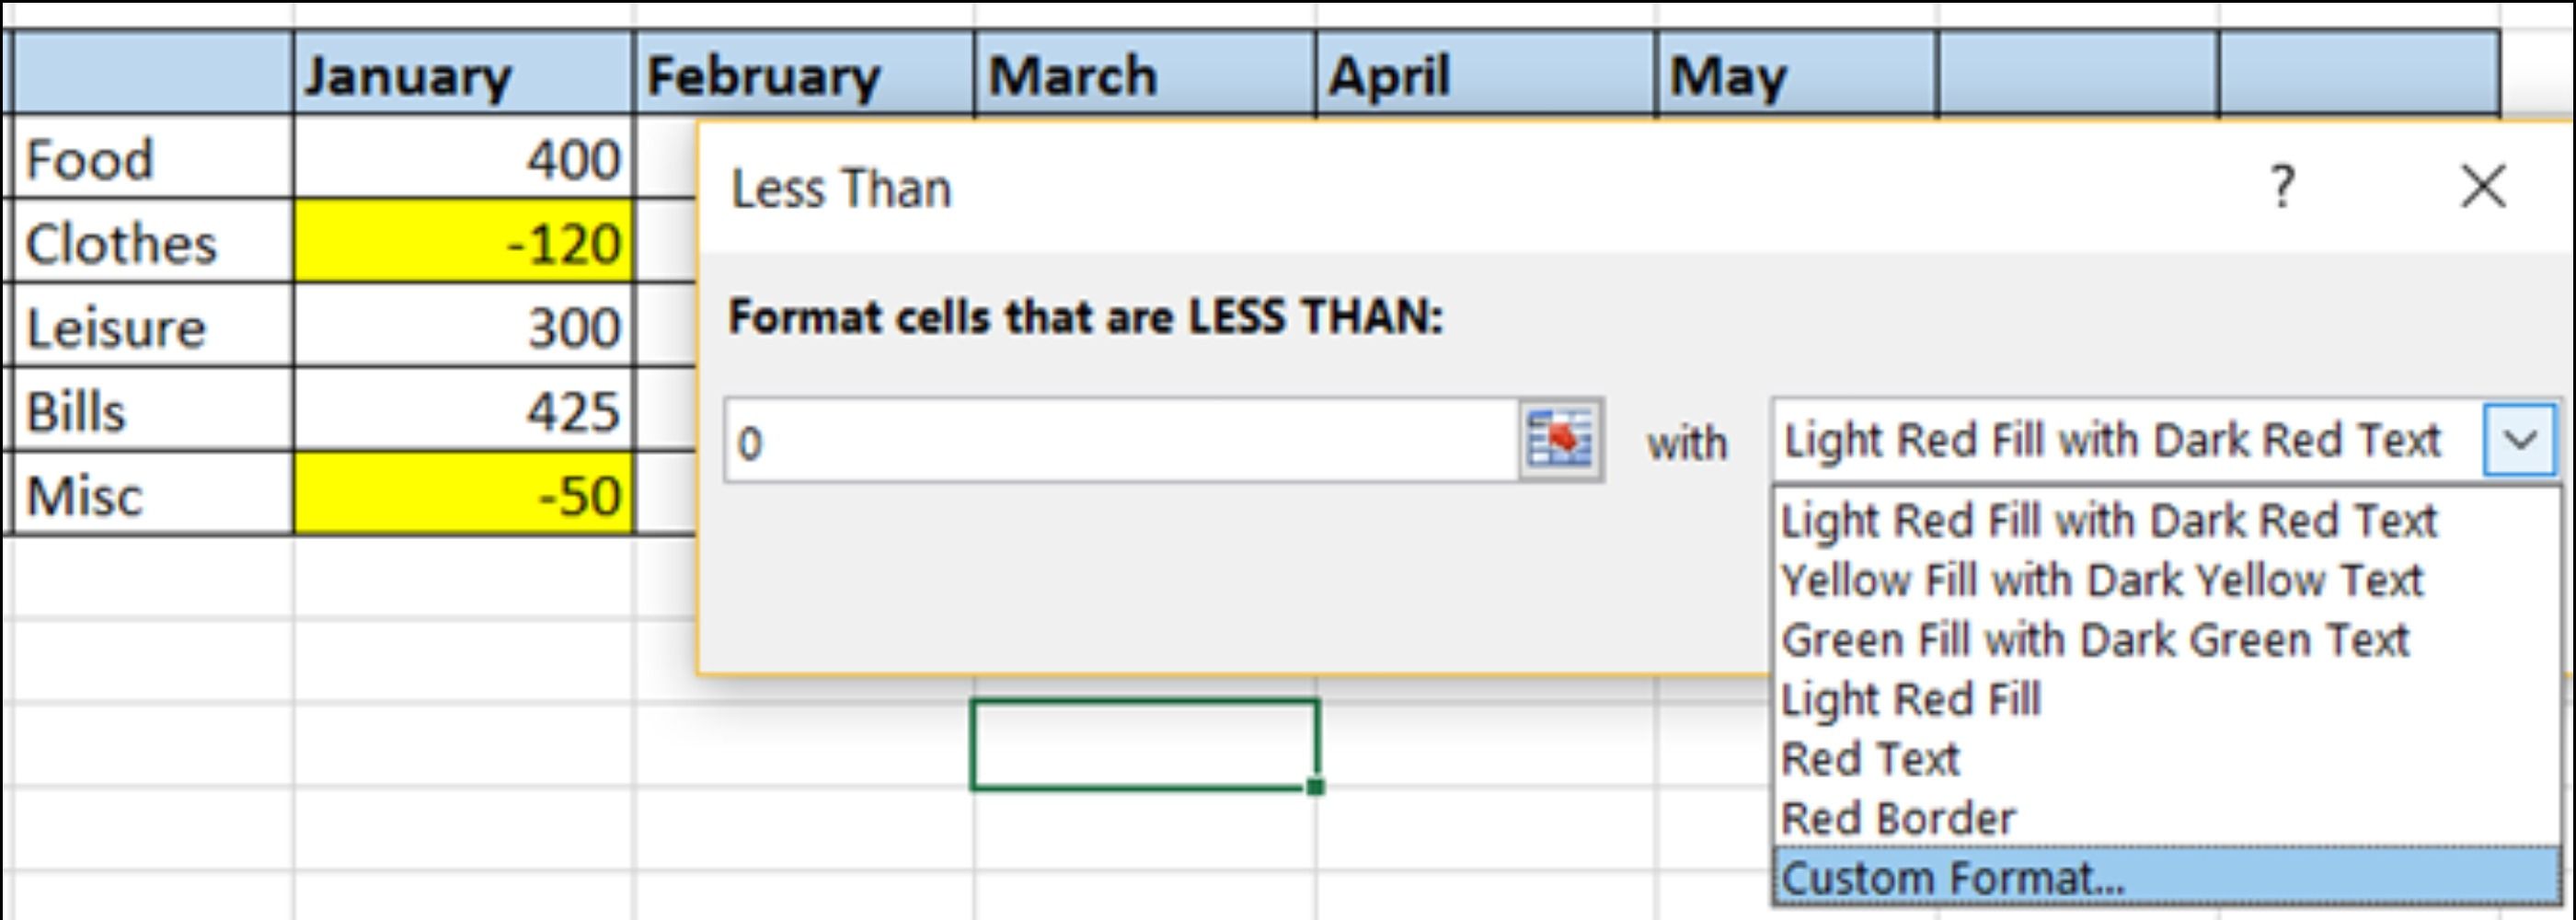 Applying conditional formatting rules to monthly budgets